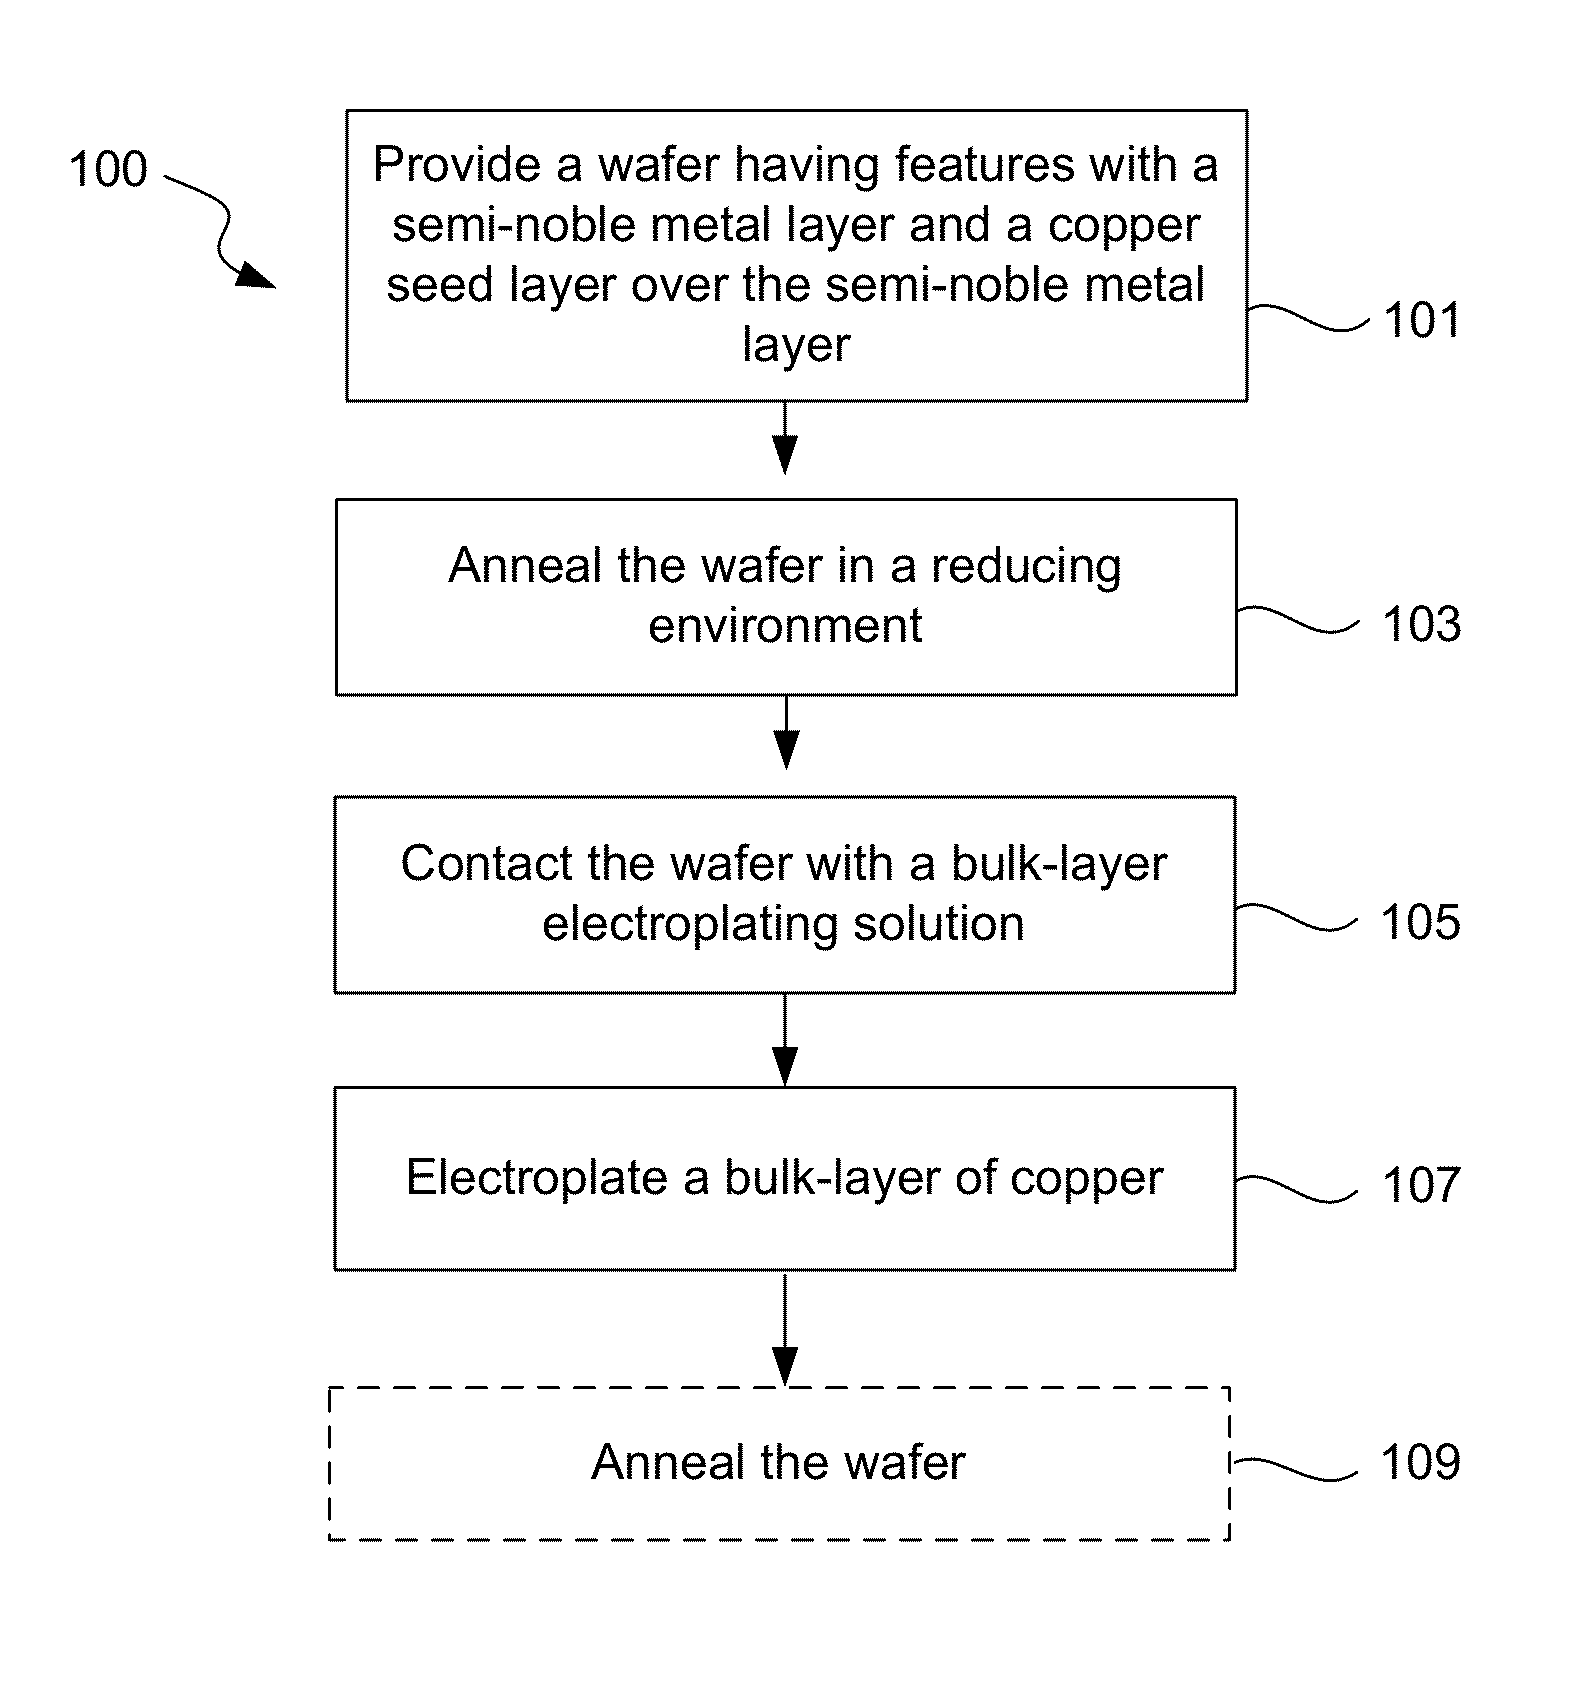 Copper electroplating process for uniform across wafer deposition and void free filling on semi-noble metal coated wafers